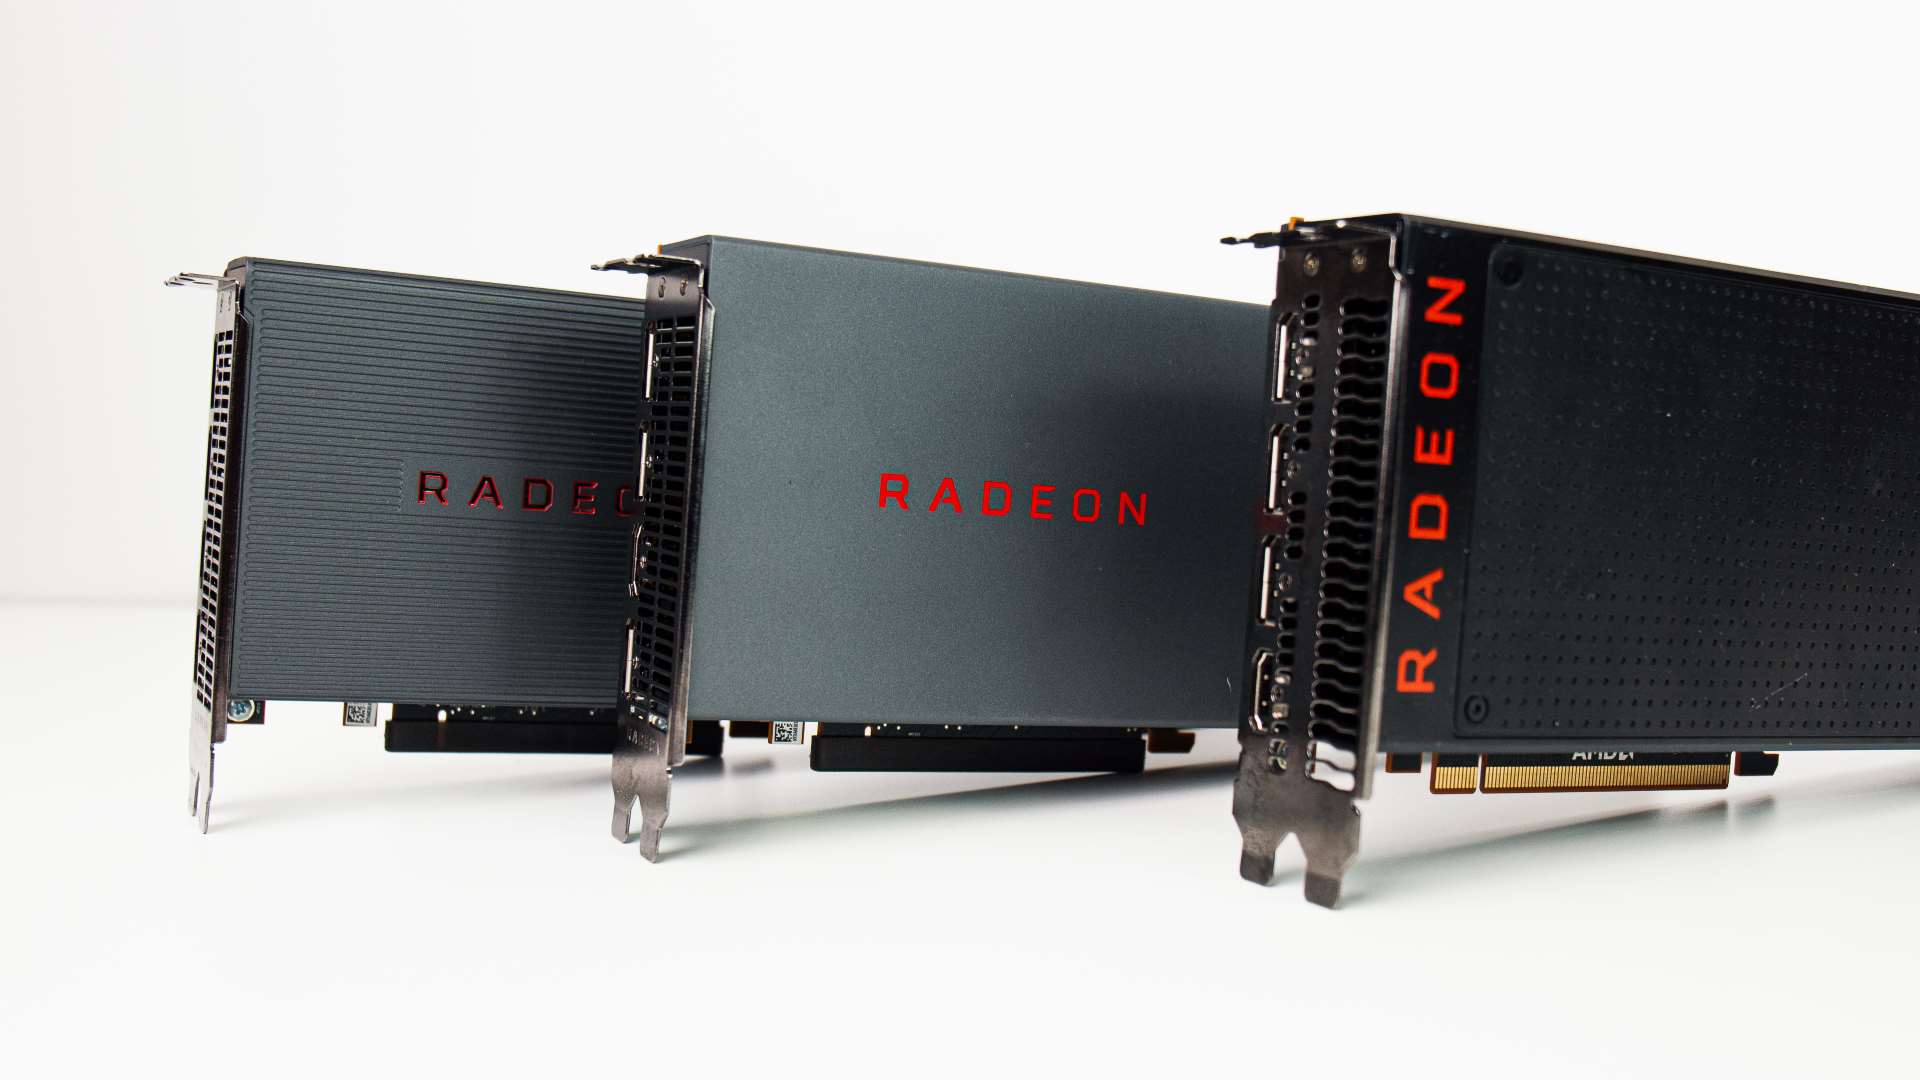 AMD Radeon RX 5700 XT review: priced against Nvidia's RTX 2060 Super… and killing it | PCGamesN